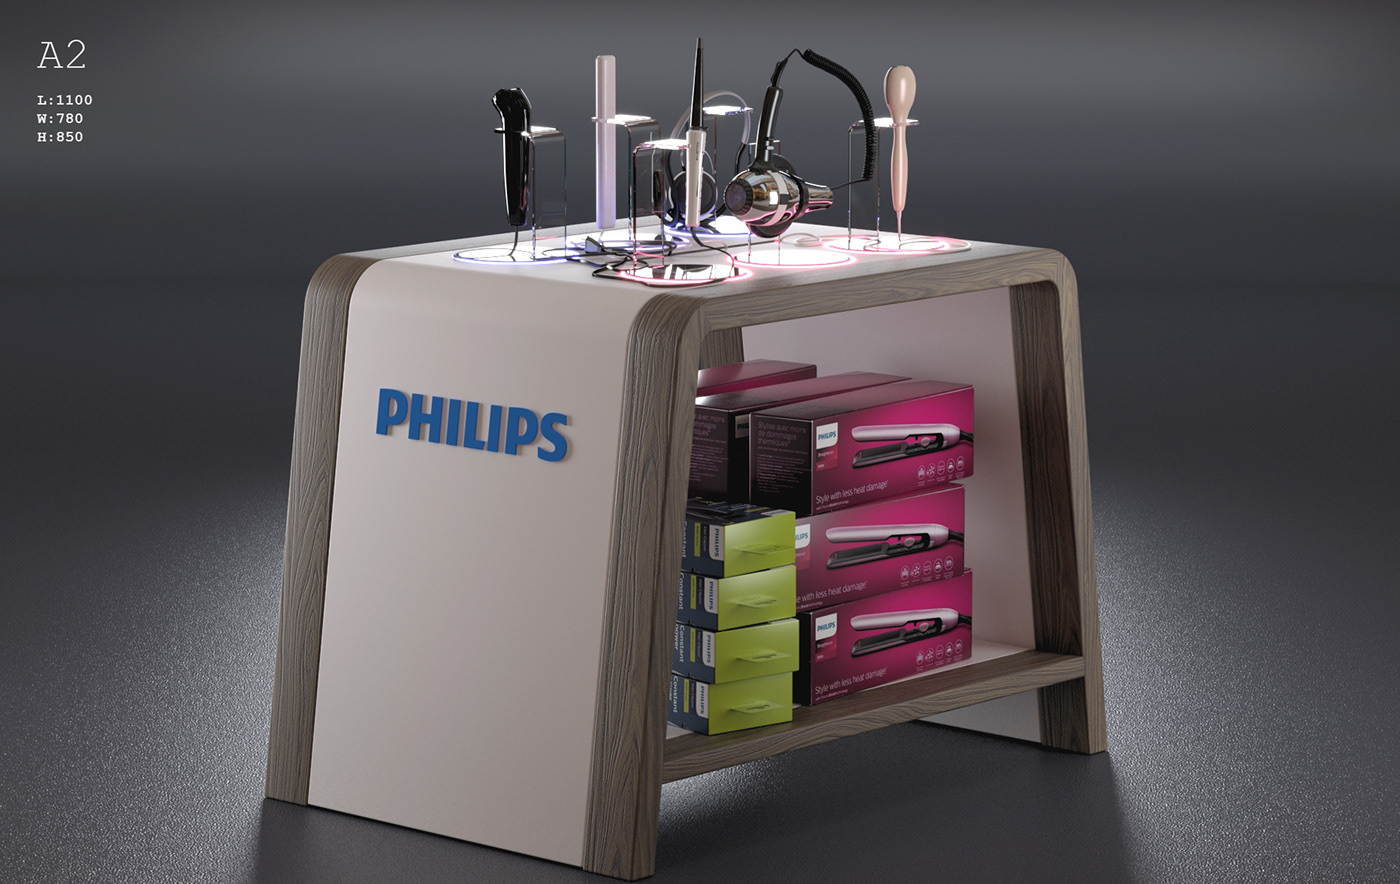 Display Gadget modern posm Render Stand table visualization vray wood